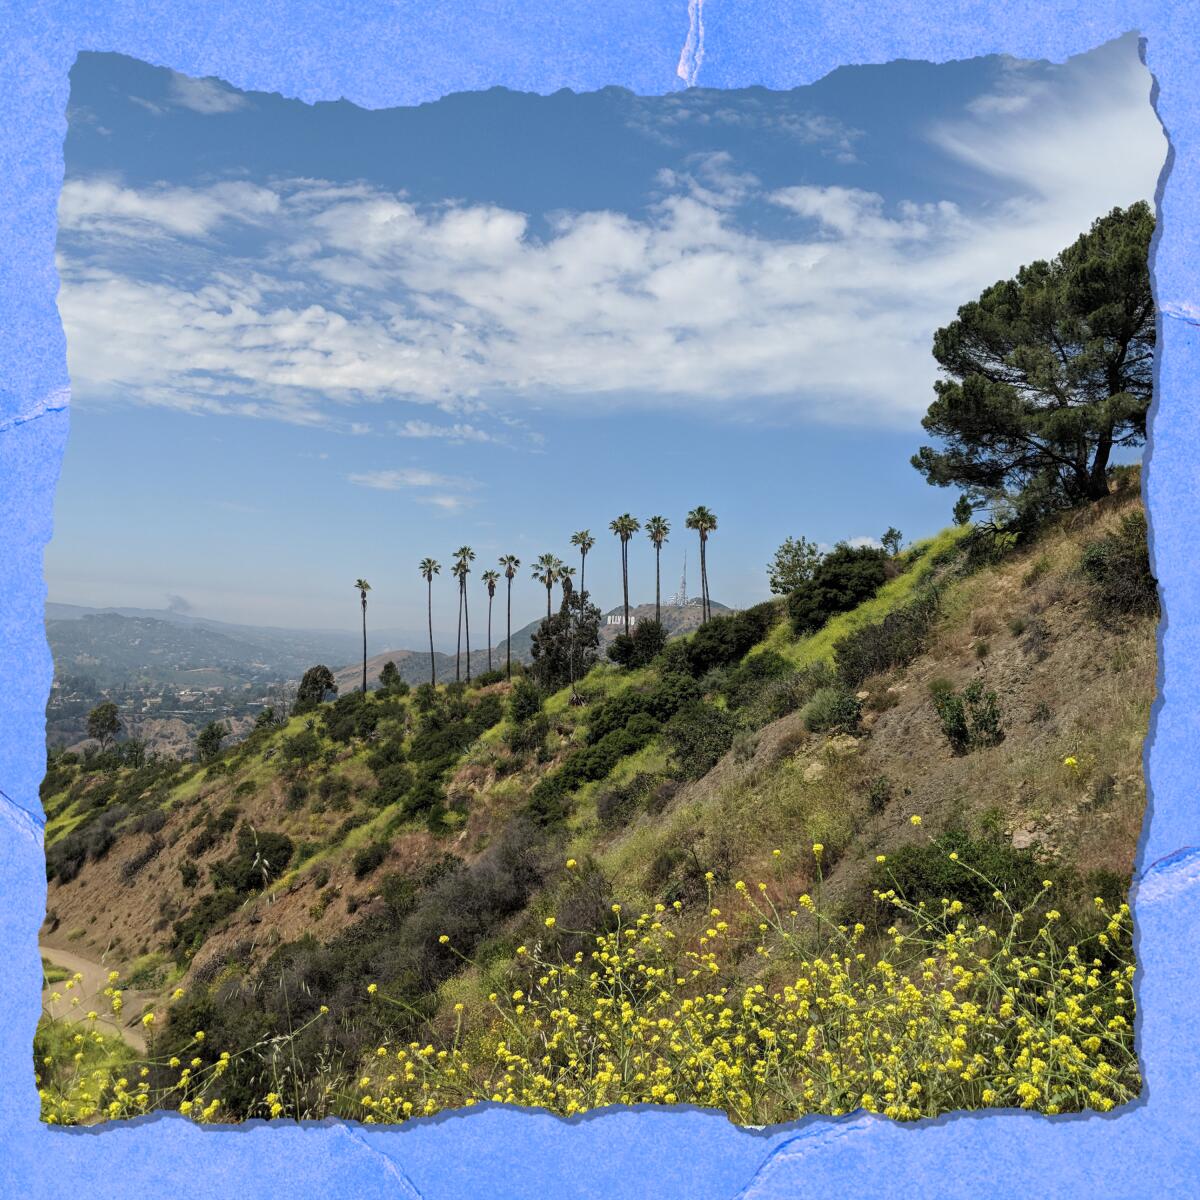 Flowers and scrub cover hills with palm trees and the Hollywood sign in the far distance.